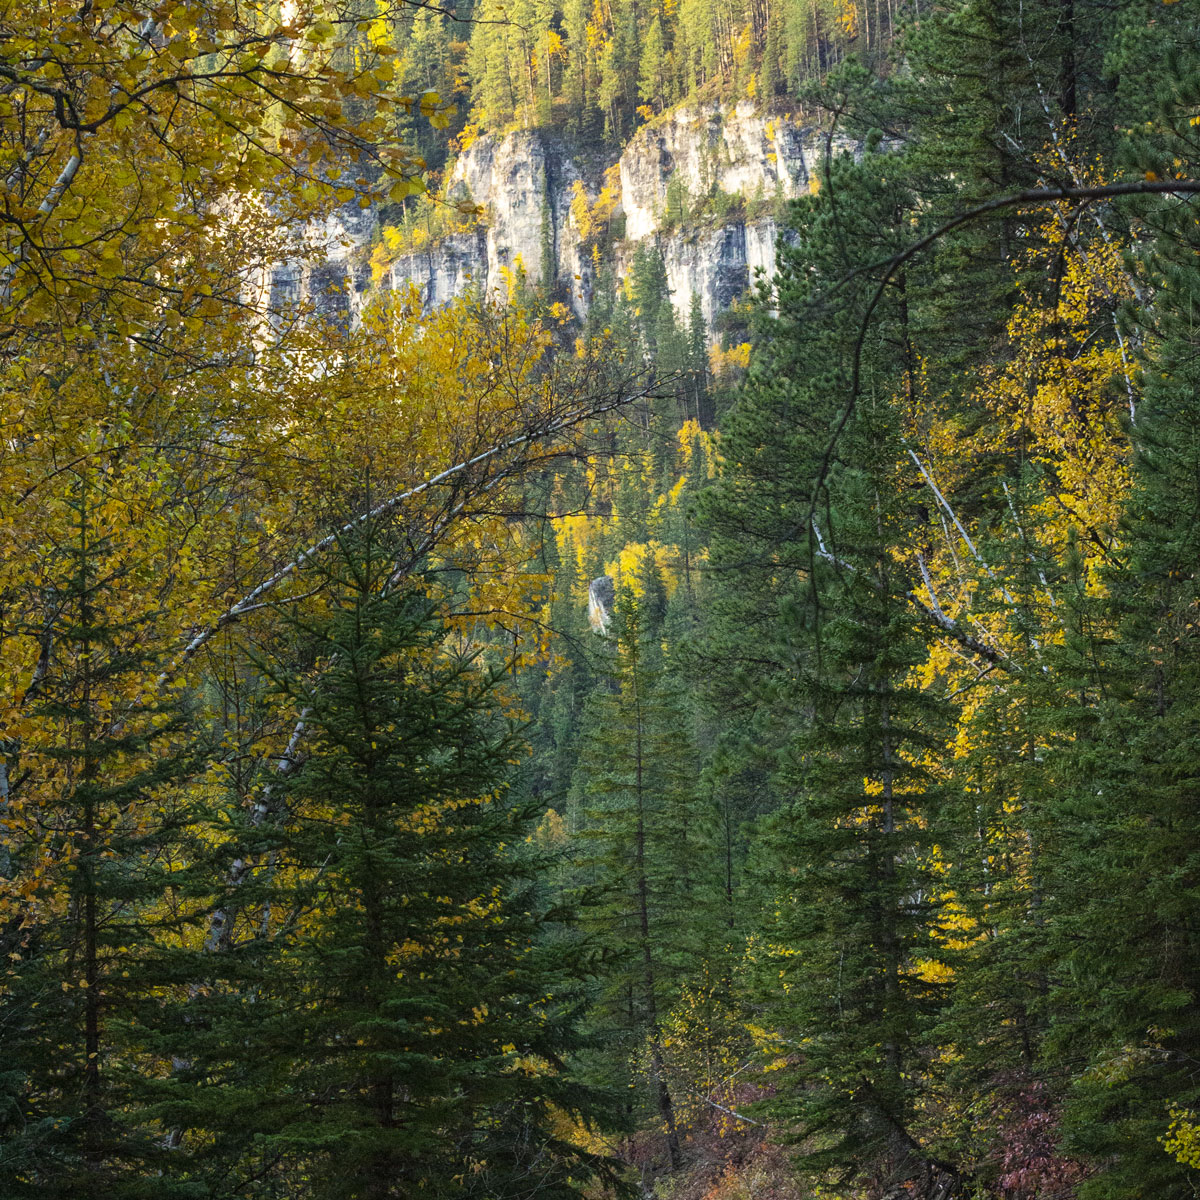 A woodland mix of pine and hardwoods stands in Autumn colors of yellow and green with the sunlit walls of Spearfish Canyon in the distance.